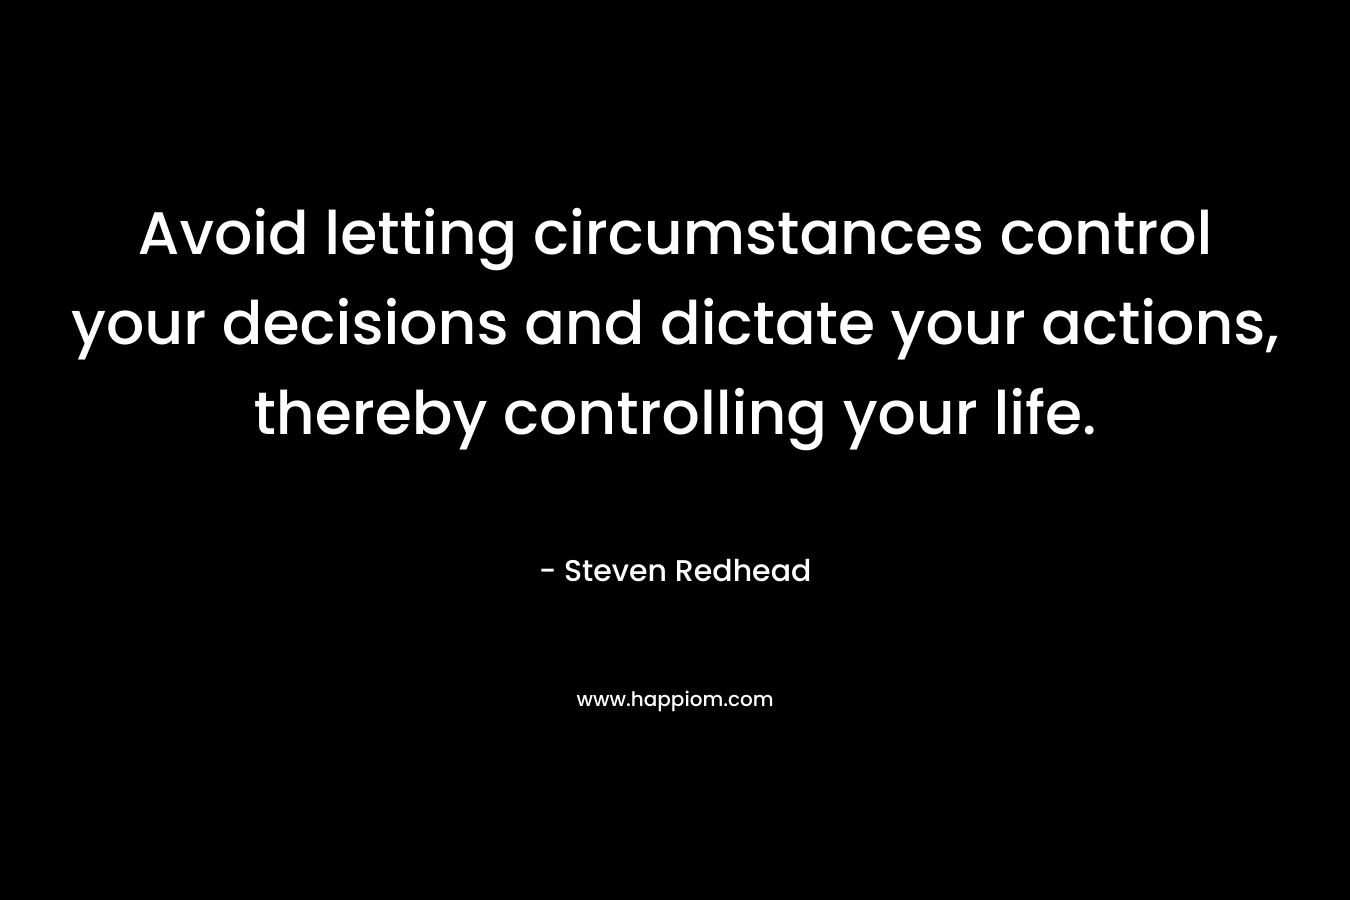 Avoid letting circumstances control your decisions and dictate your actions, thereby controlling your life. – Steven Redhead